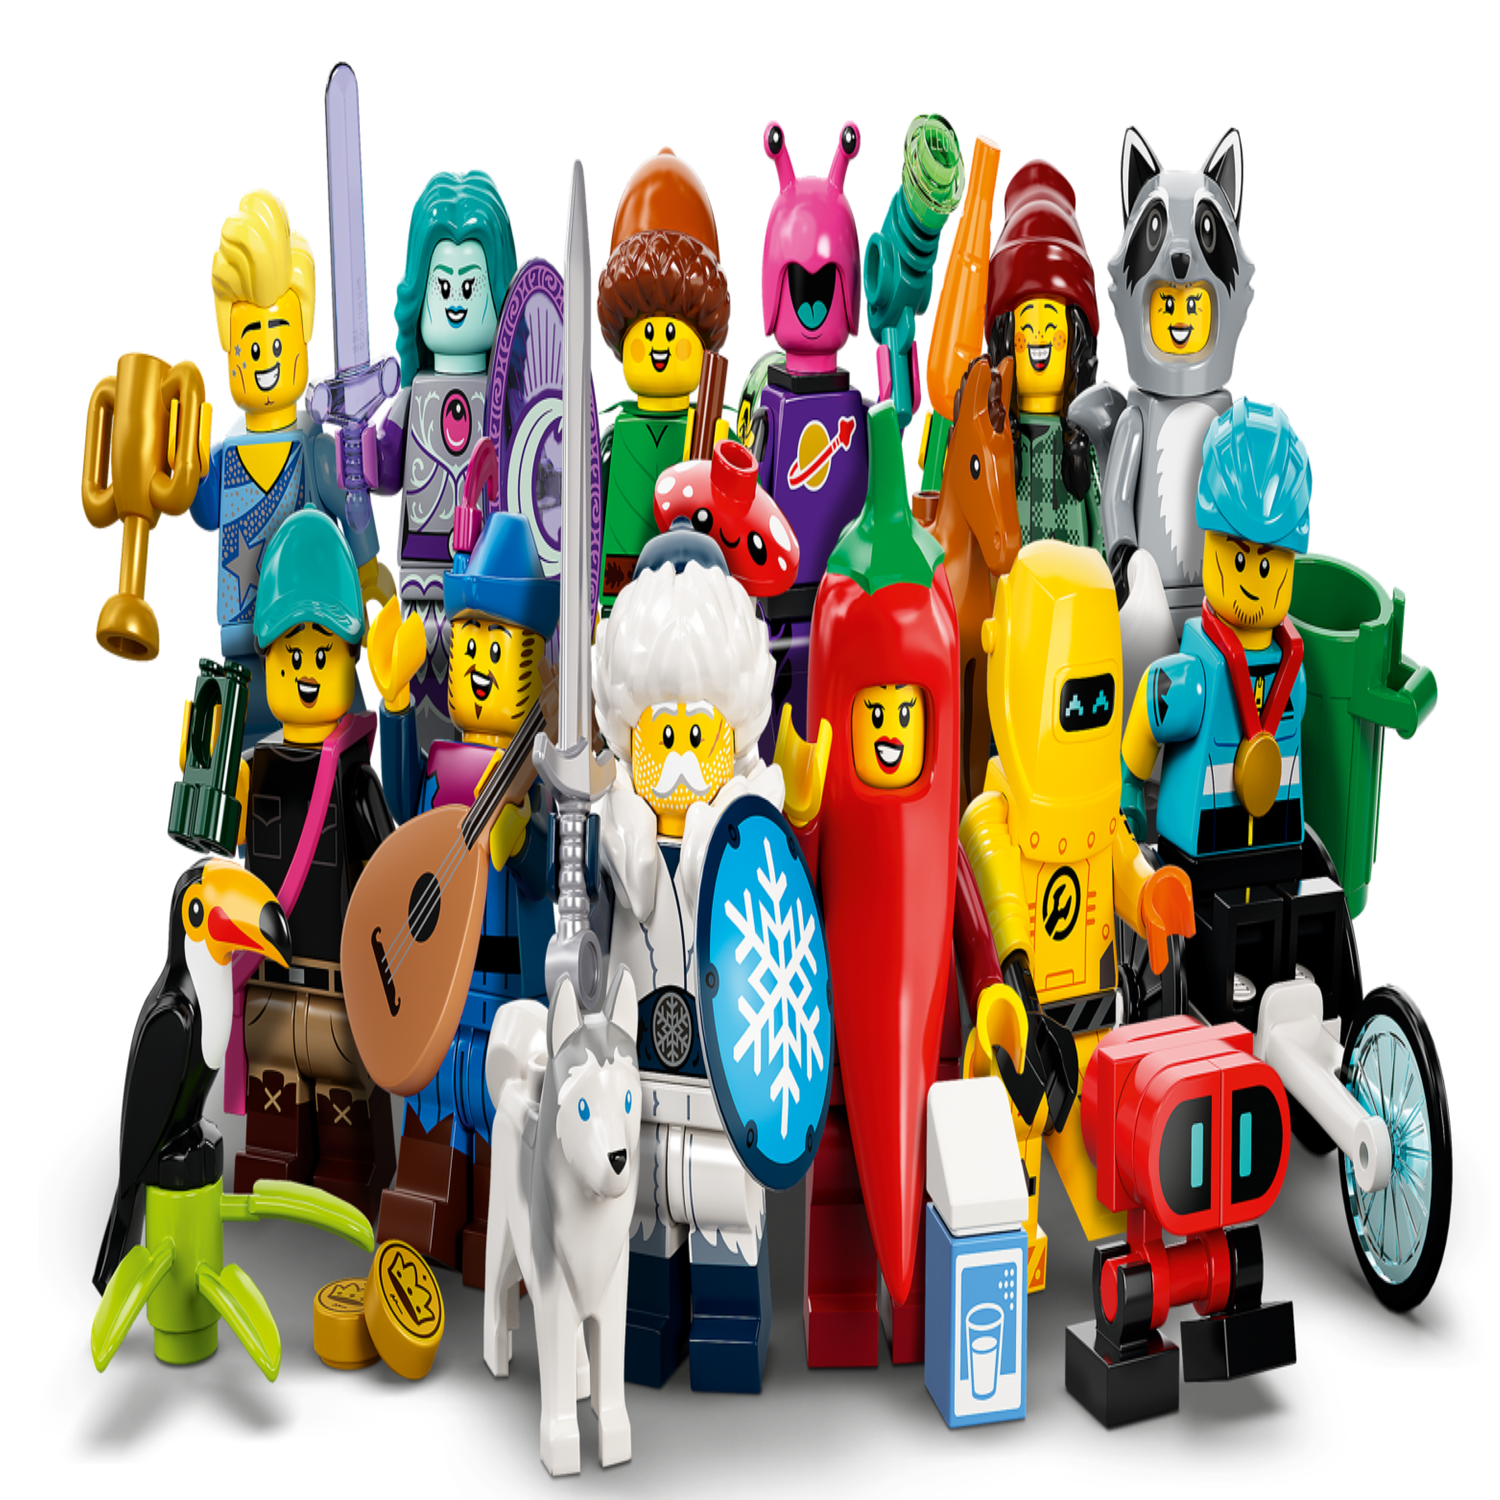 Series 22 71032 | Minifigures Buy online the Official LEGO® Shop